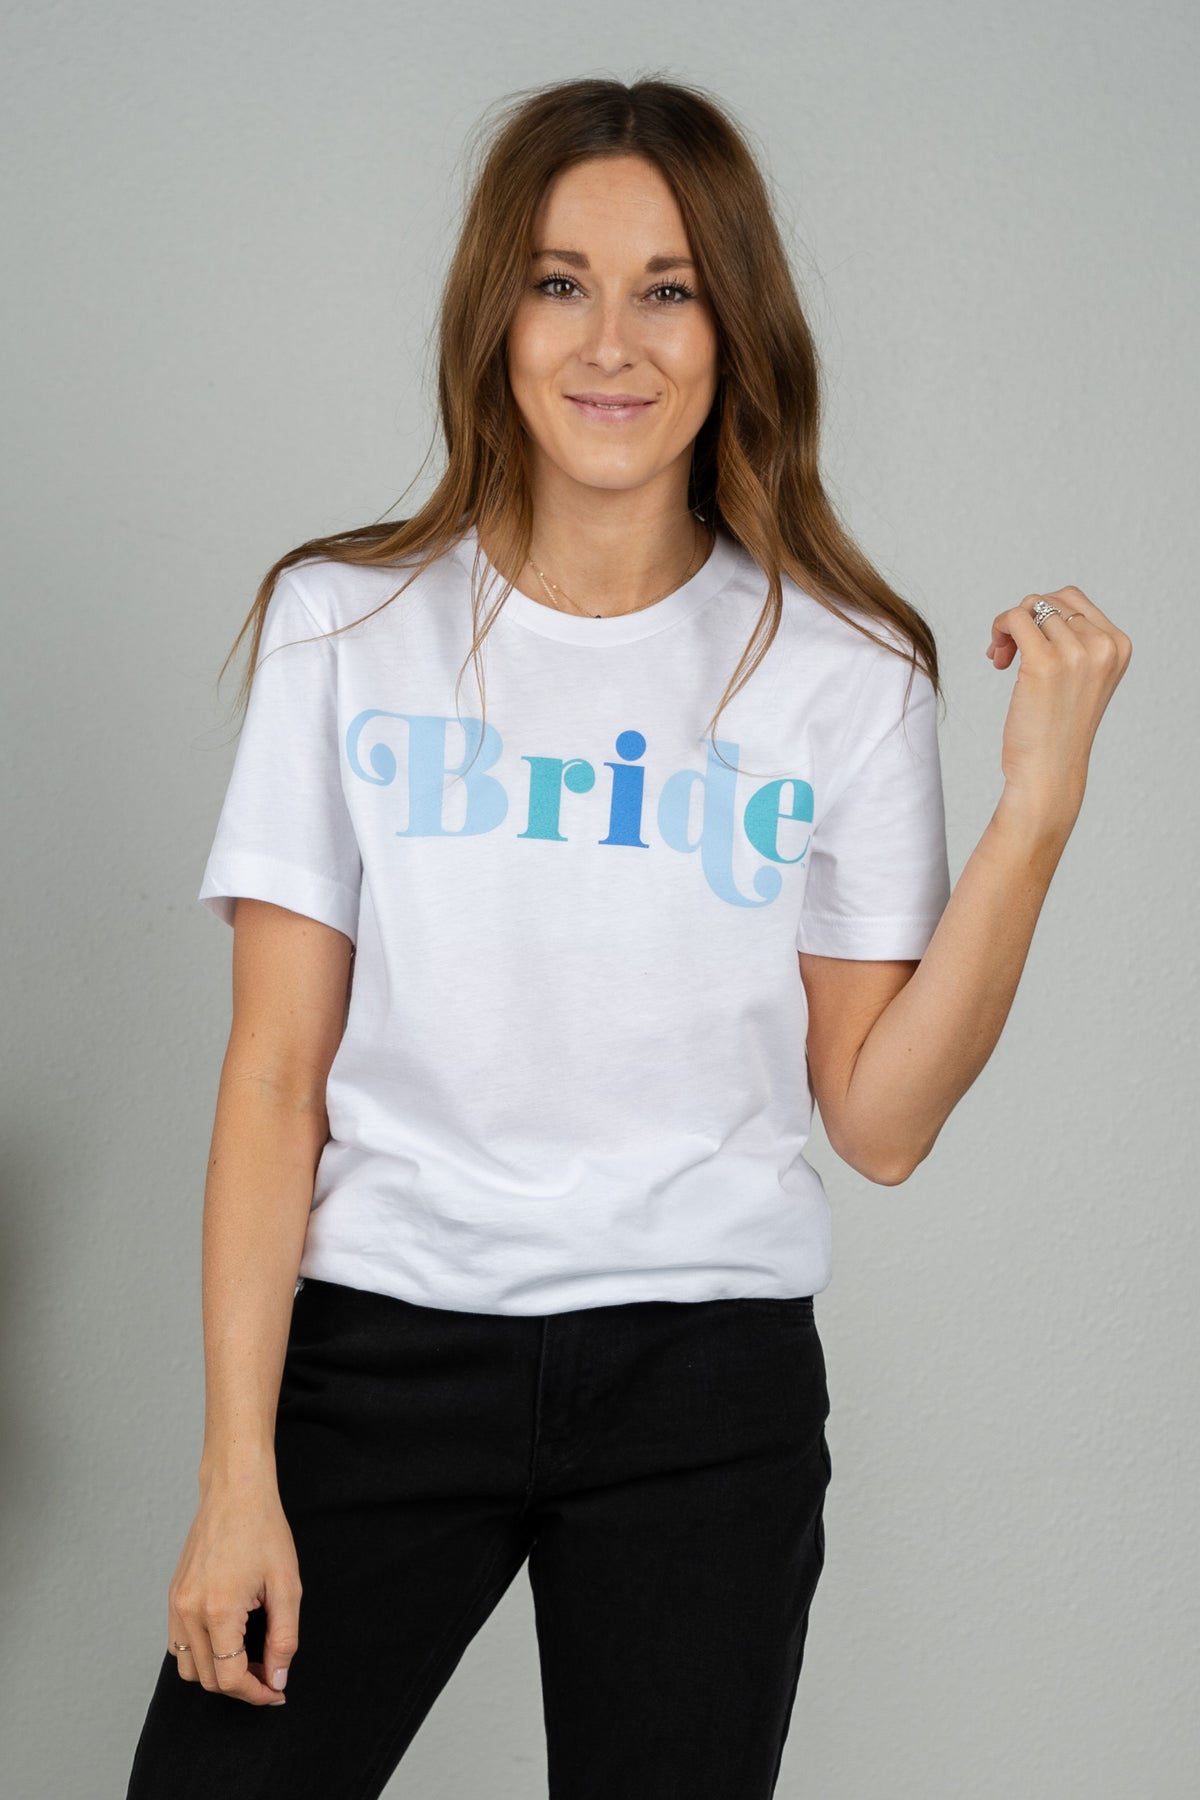 Bride swash font short sleeve t-shirt white - Cute T-shirts - Trendy Graphic T-Shirts at Lush Fashion Lounge Boutique in Oklahoma City